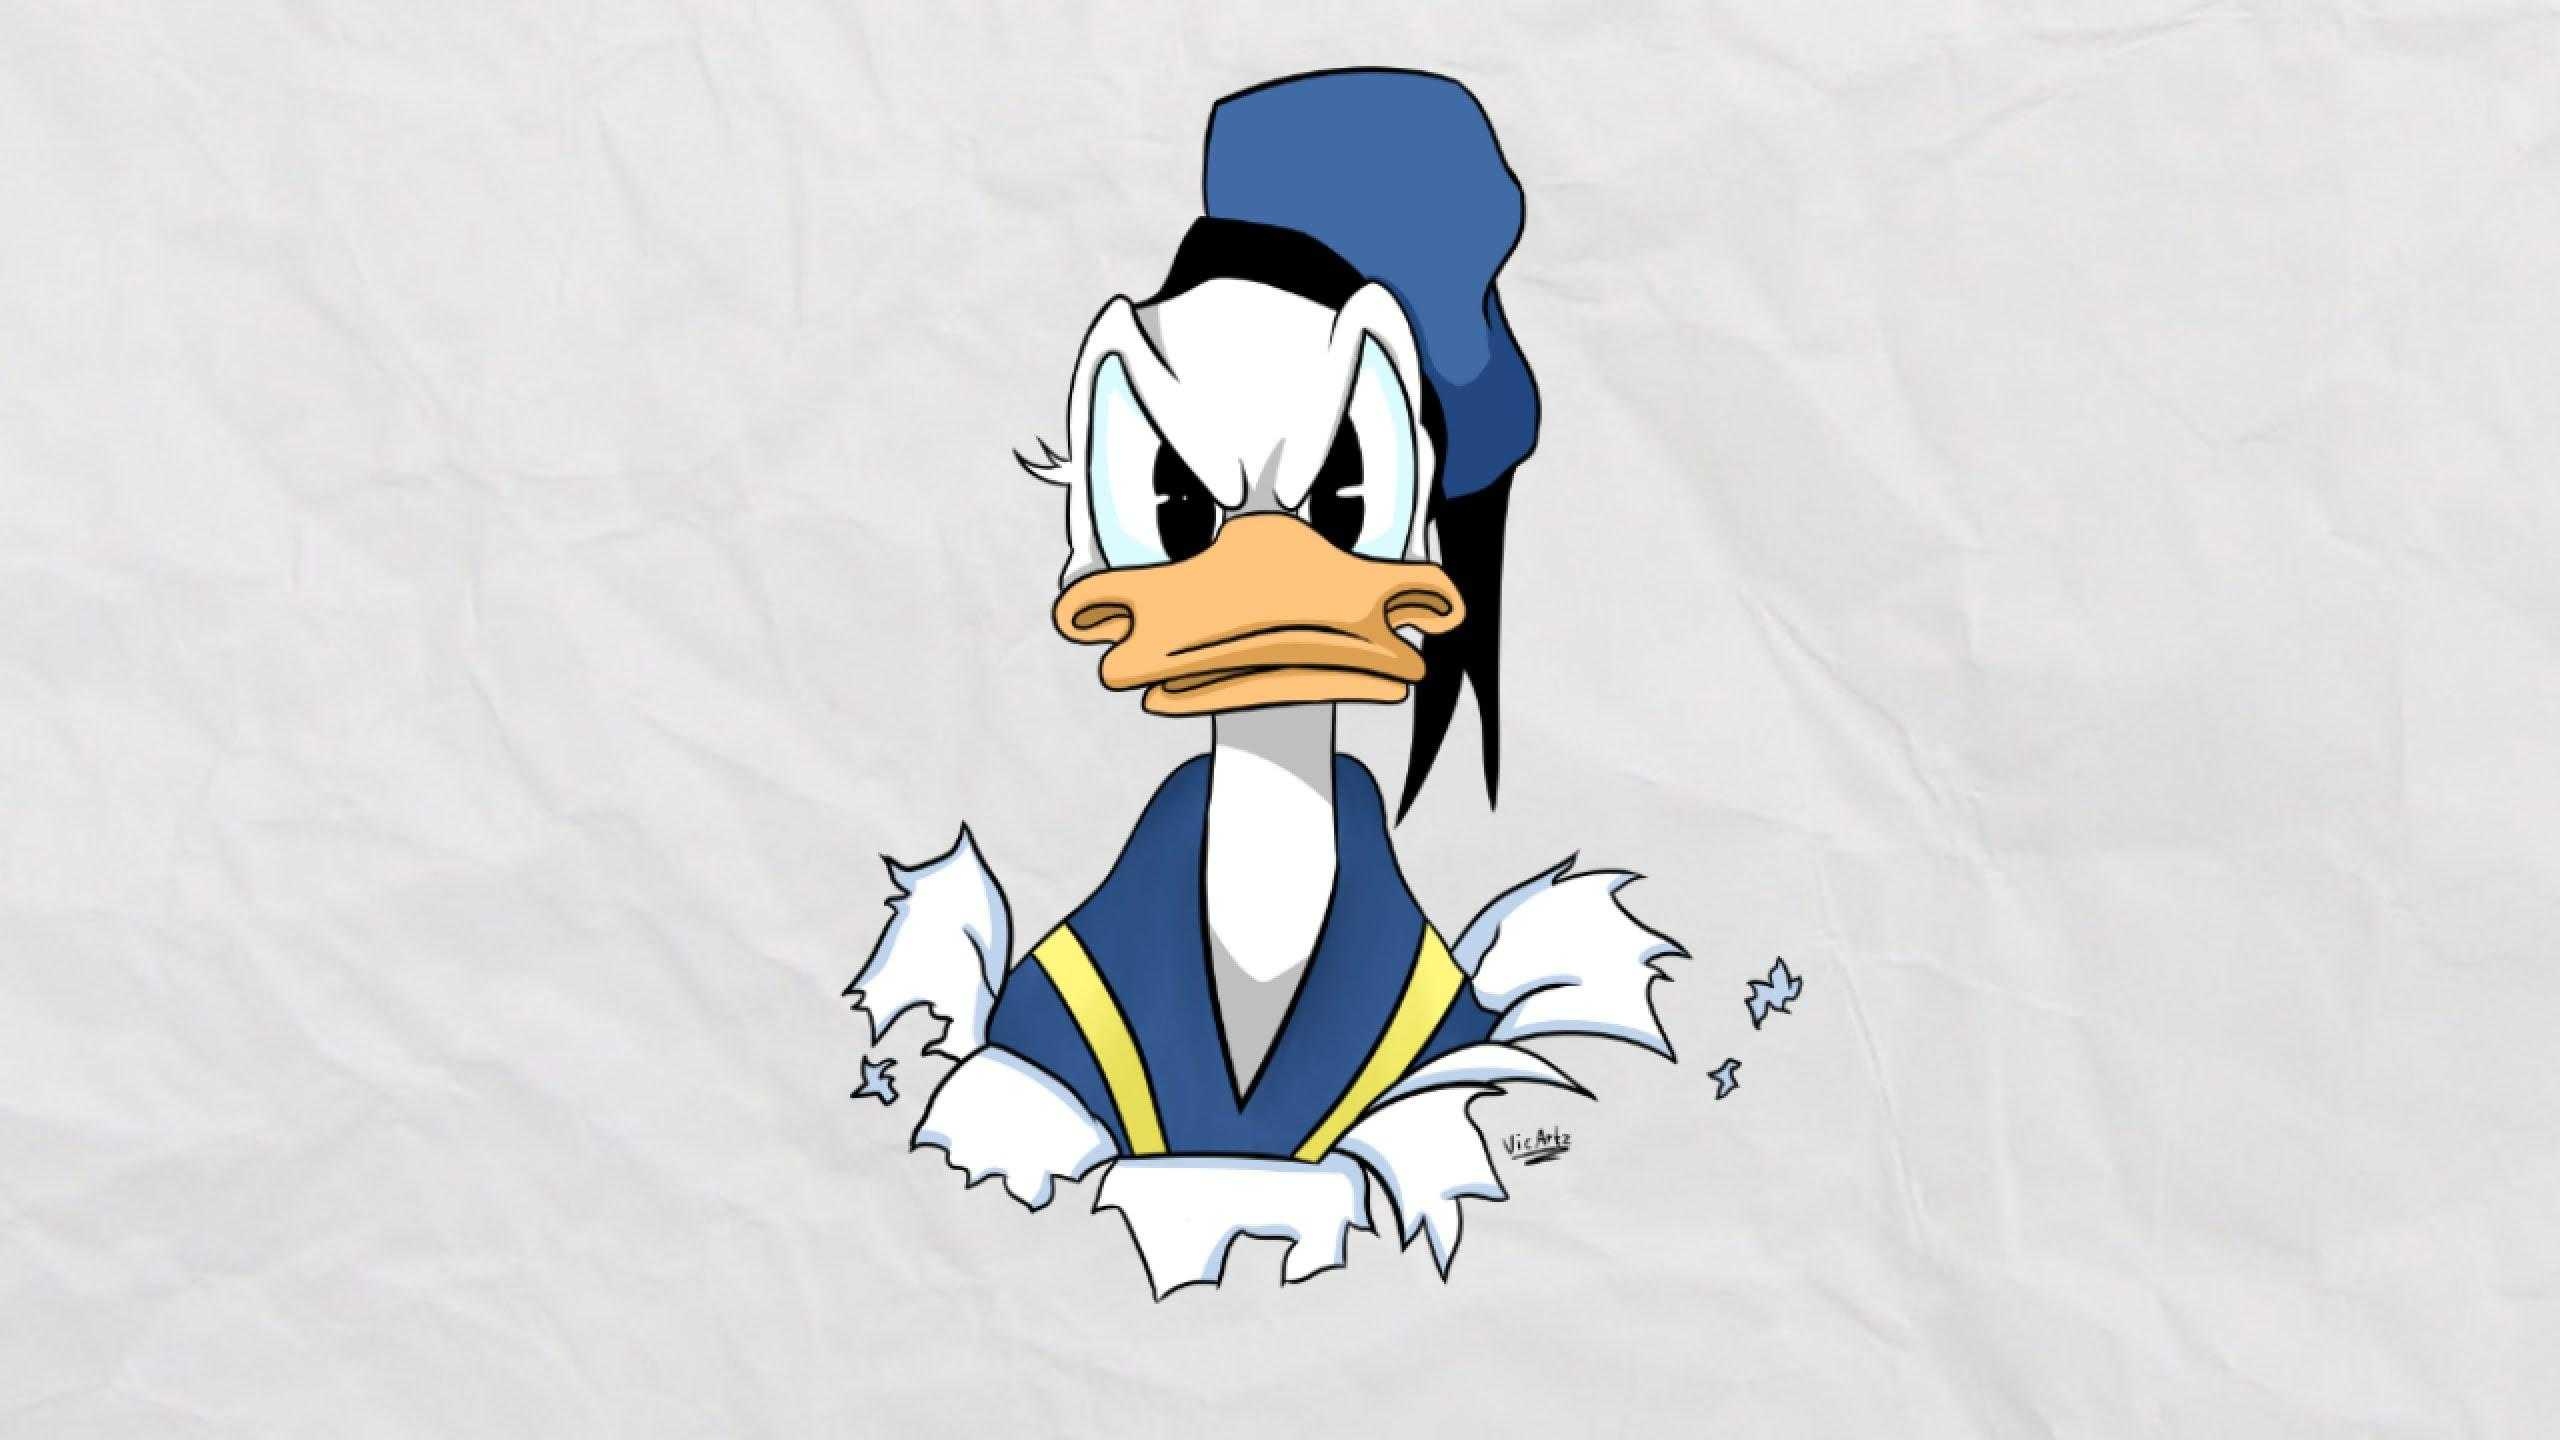 Donald Duck: The most published comic book character, Appeared in more films than any other Disney character. 2560x1440 HD Wallpaper.